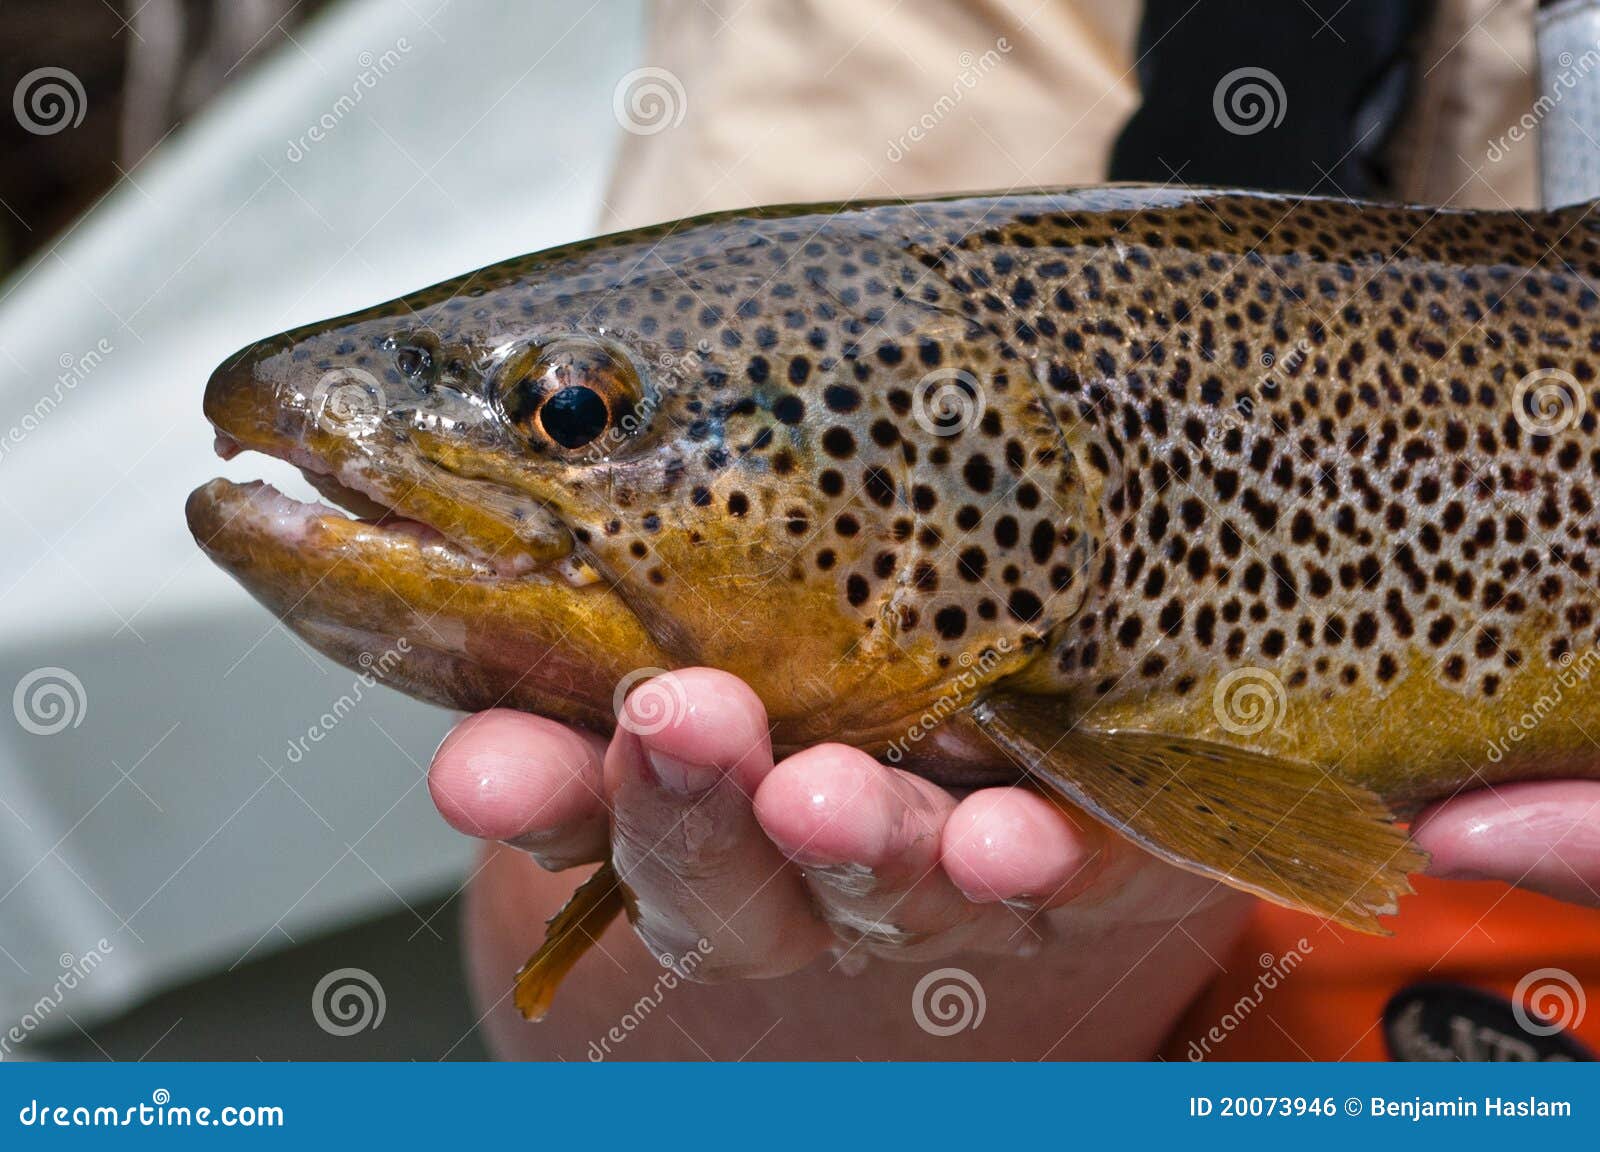 https://thumbs.dreamstime.com/z/close-up-brown-trout-being-caught-20073946.jpg